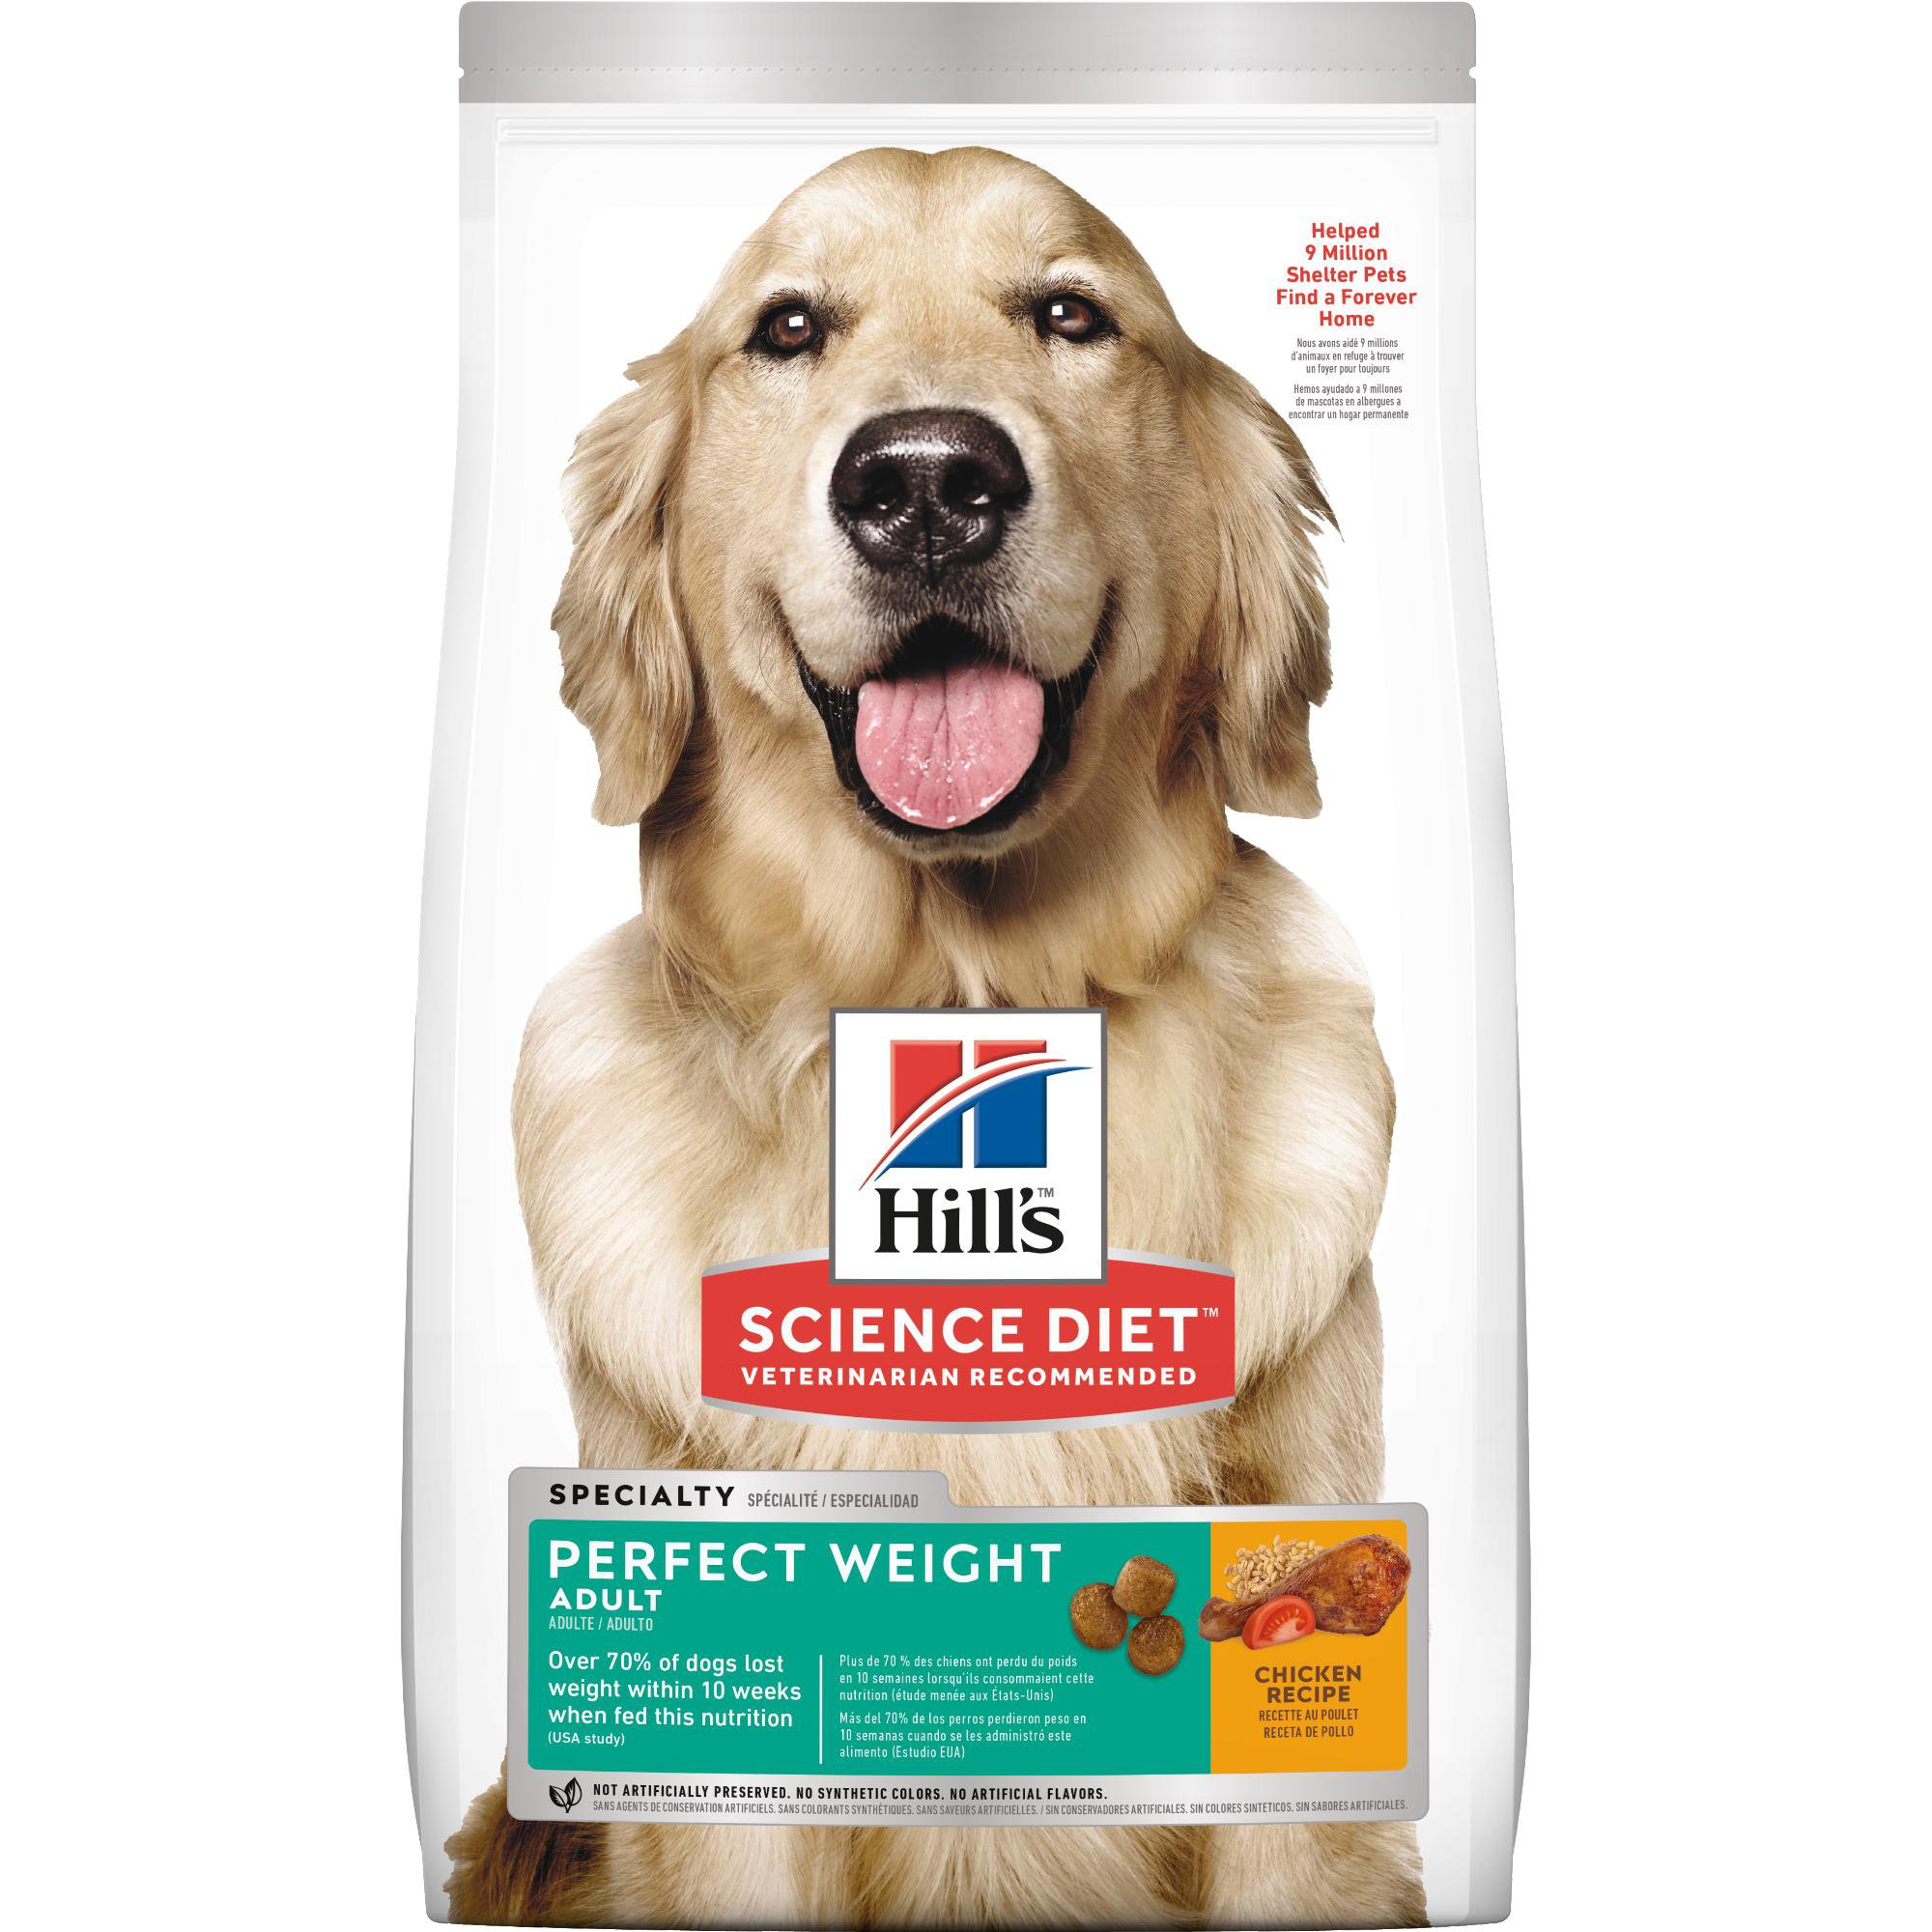 Hill's Science Diet Perfect Weight Adult Dog Food | Petco